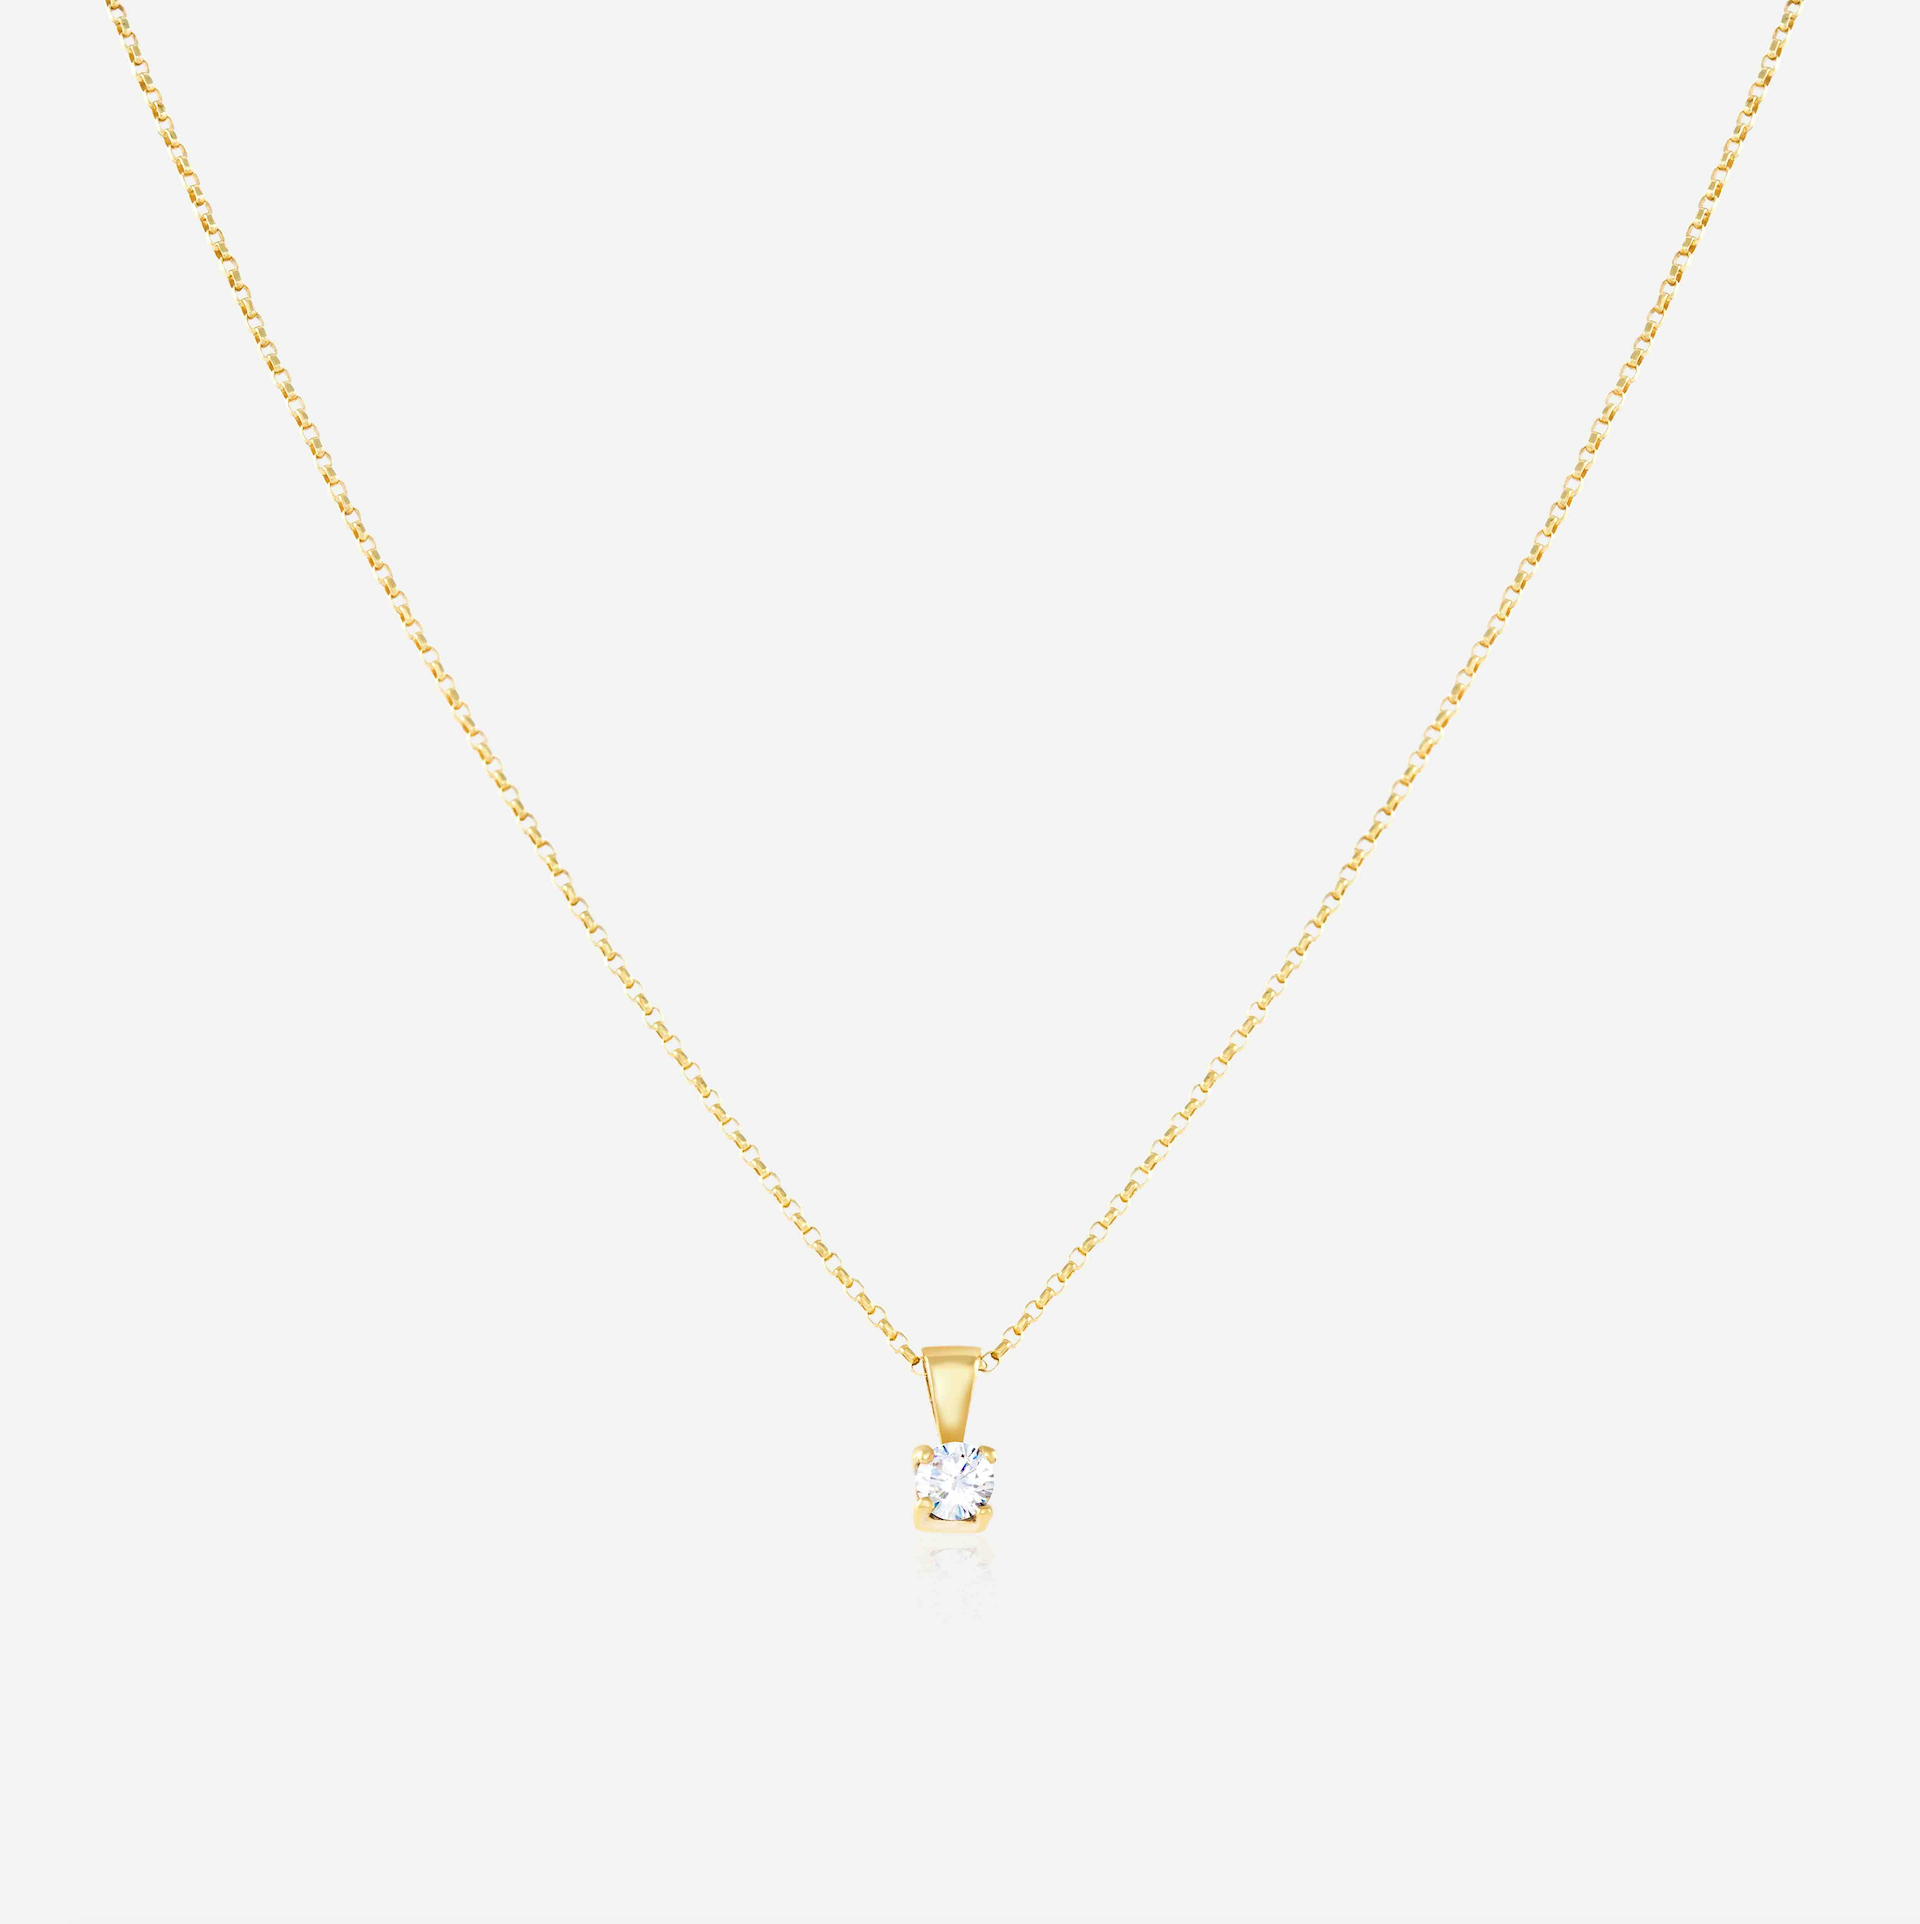 9ct Yellow Gold Solitare Pendent